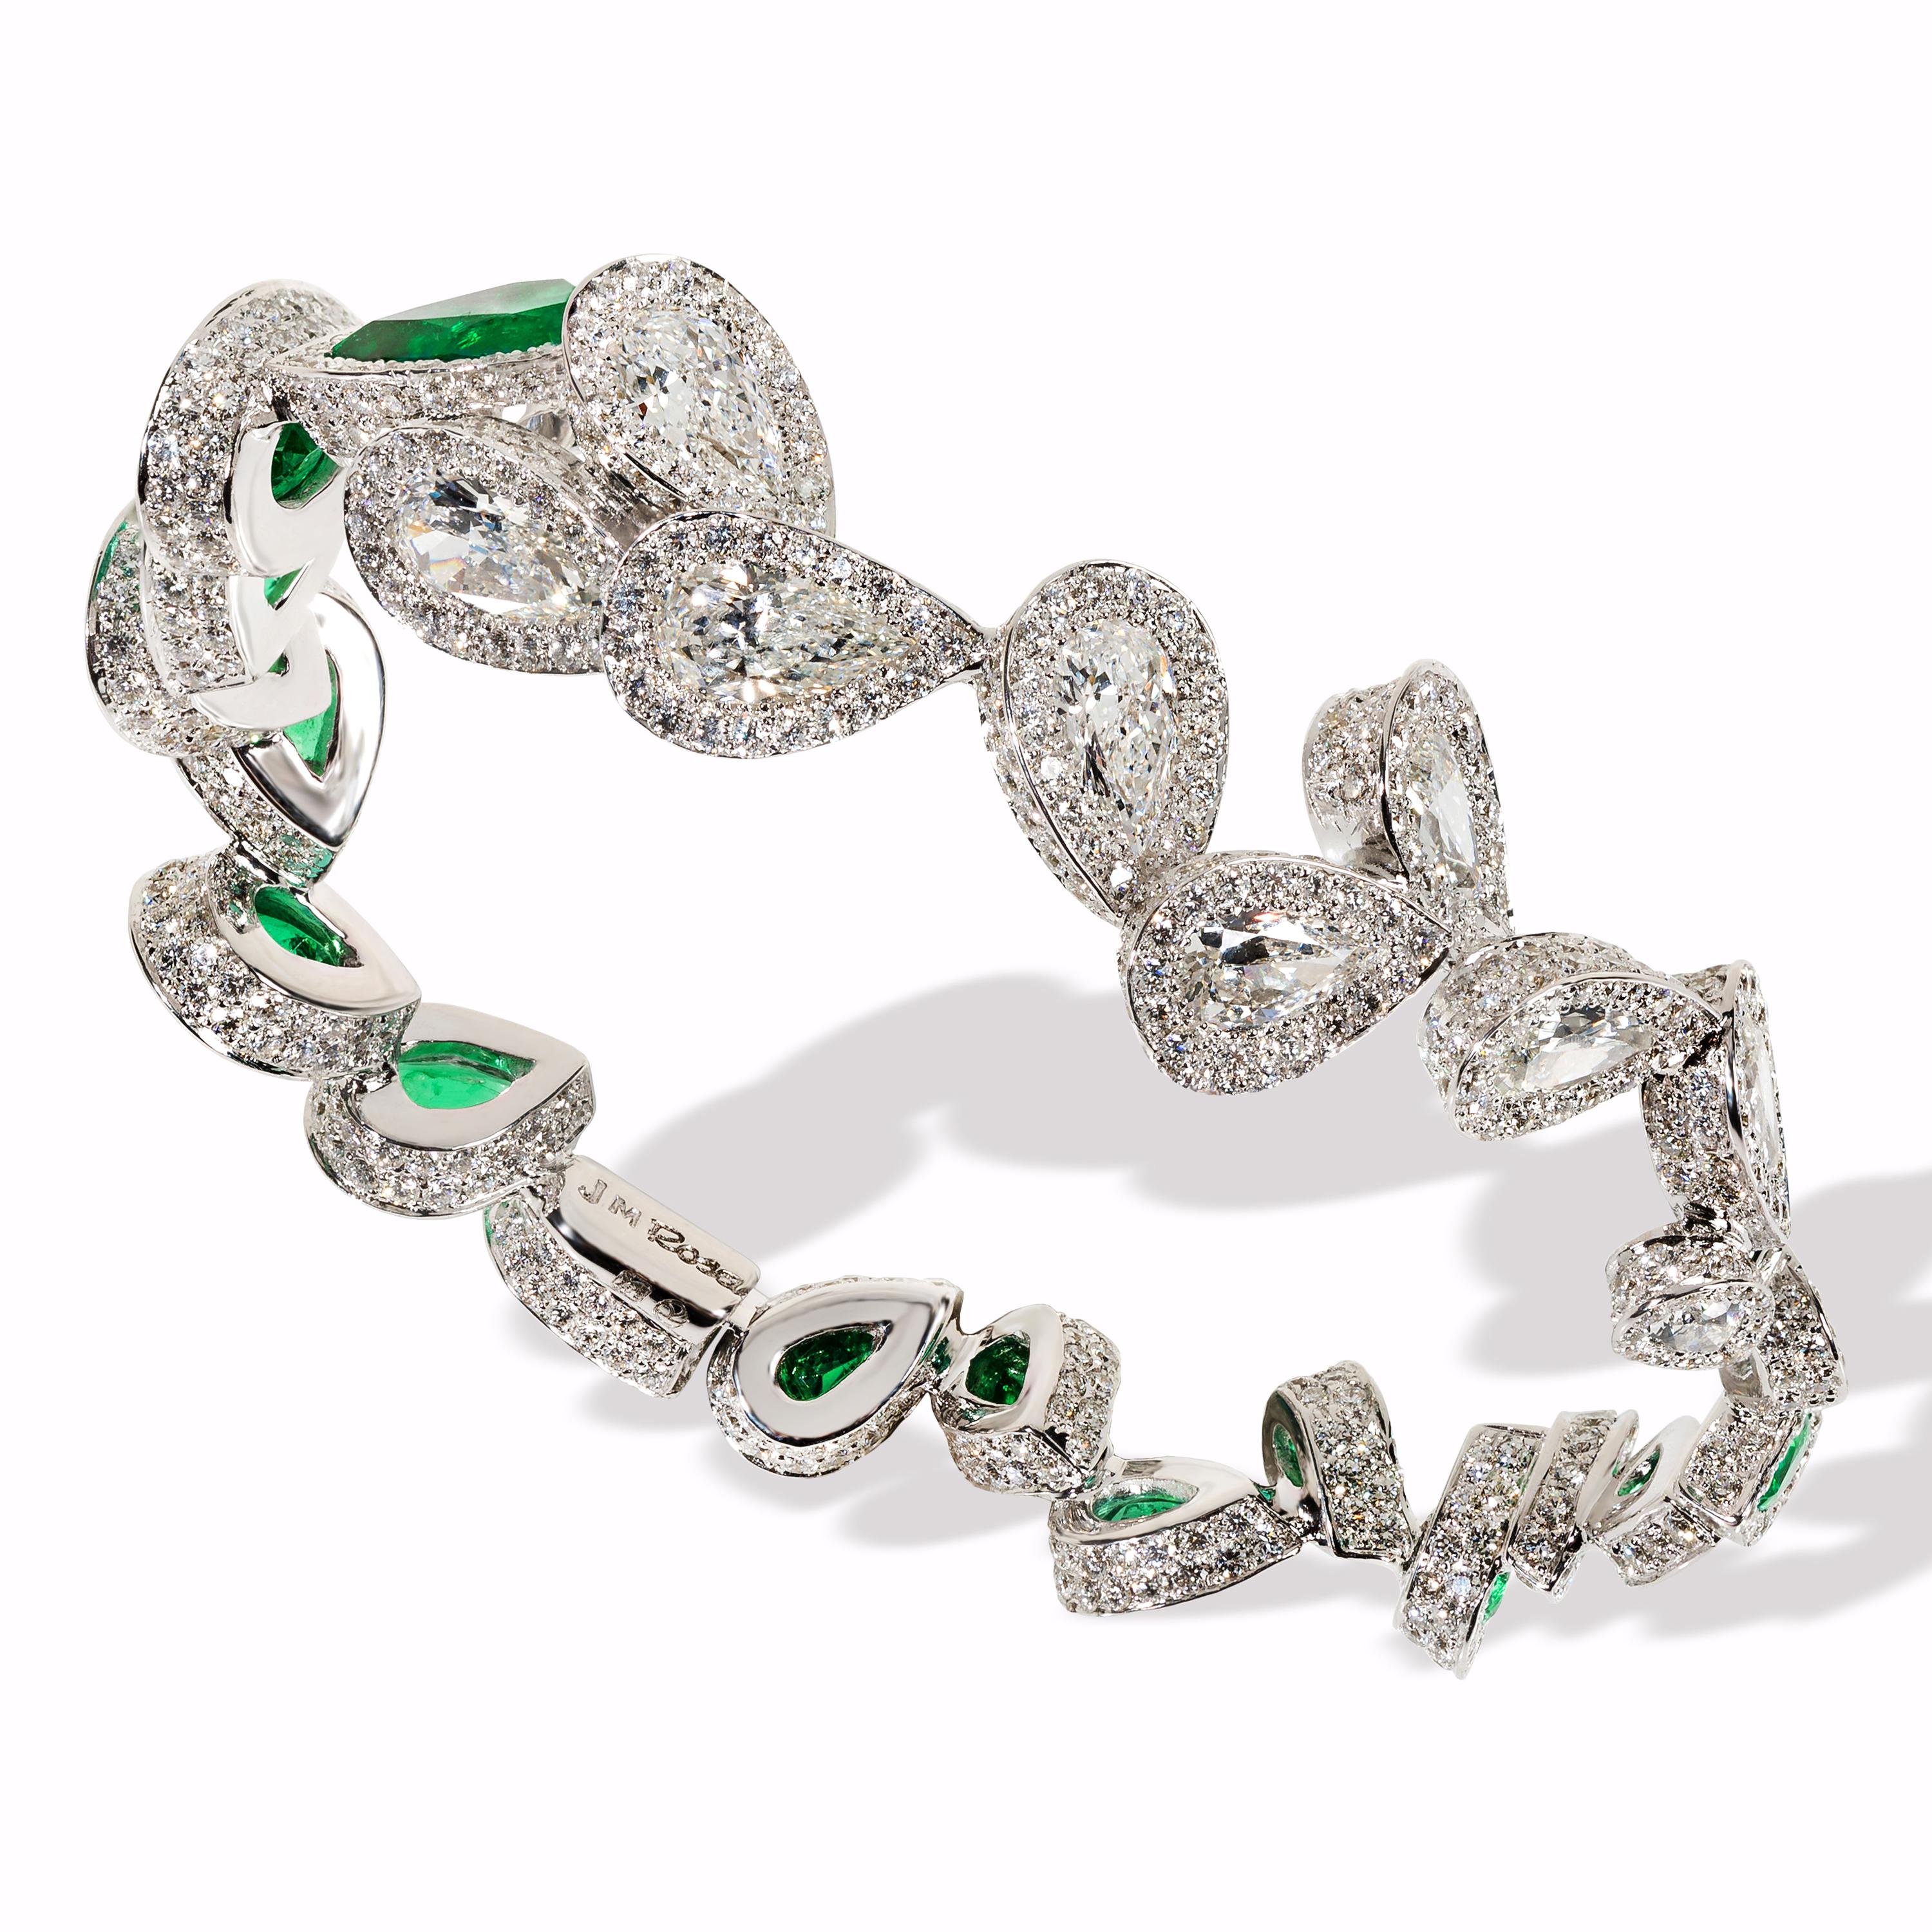 Women's or Men's Rosior one-off GIA Certified Pear Cut Diamond and Emerald Bracelet in White Gold